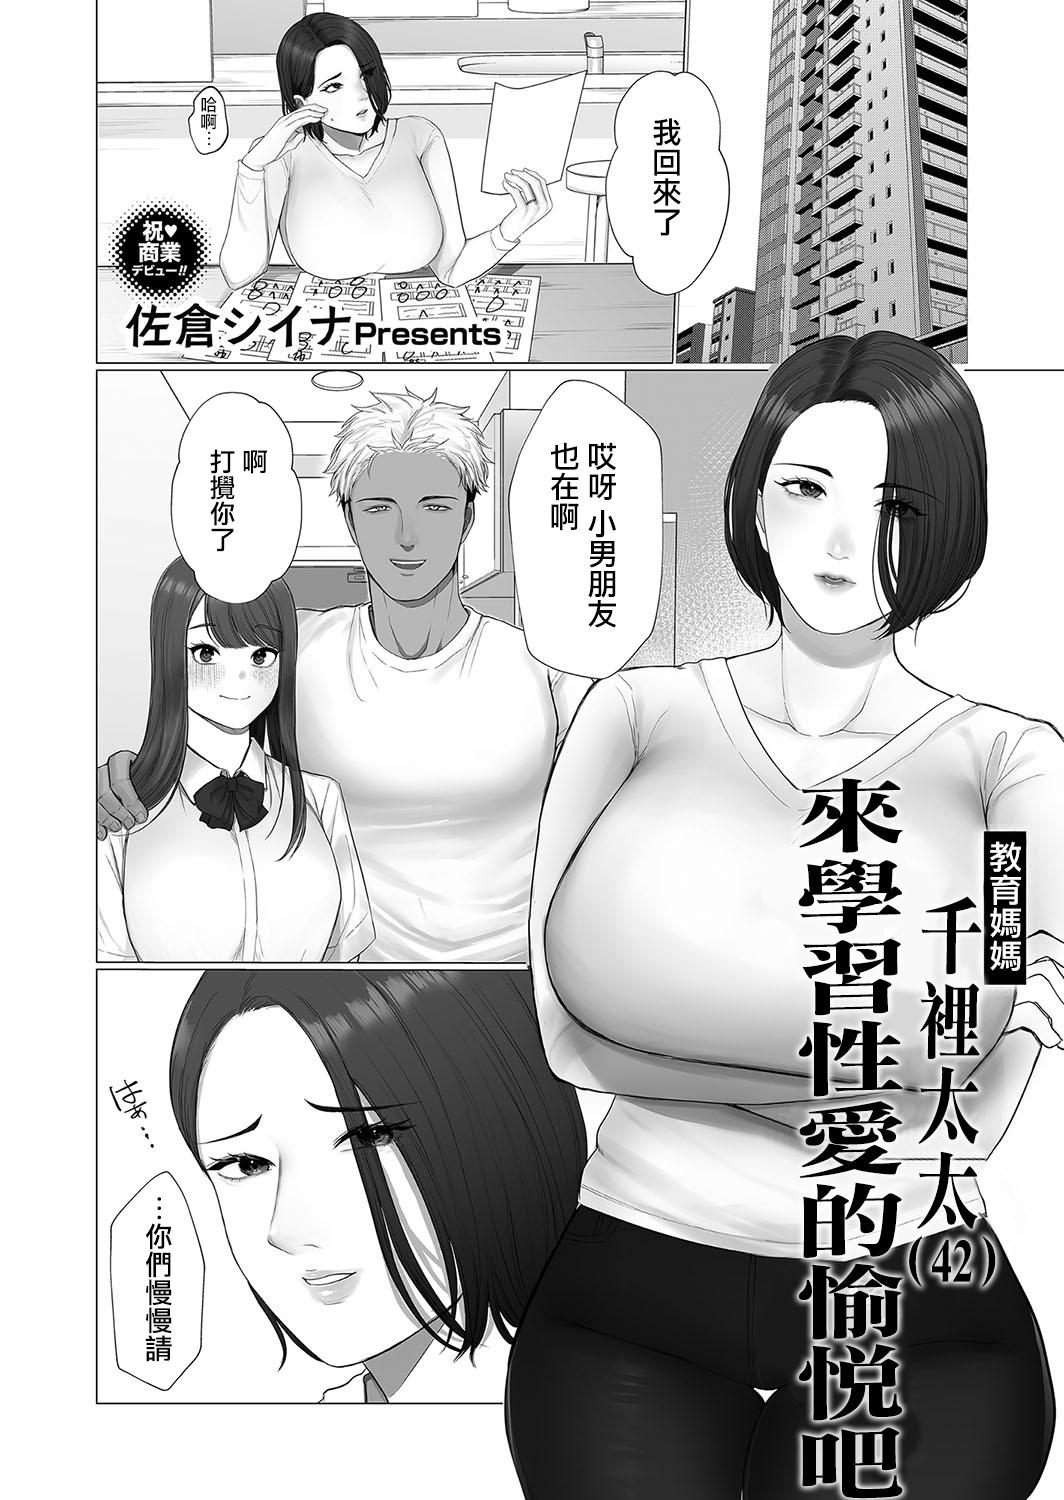 Awesome 教育ママちさとさん 性の悦びを学 Nudes - Page 1